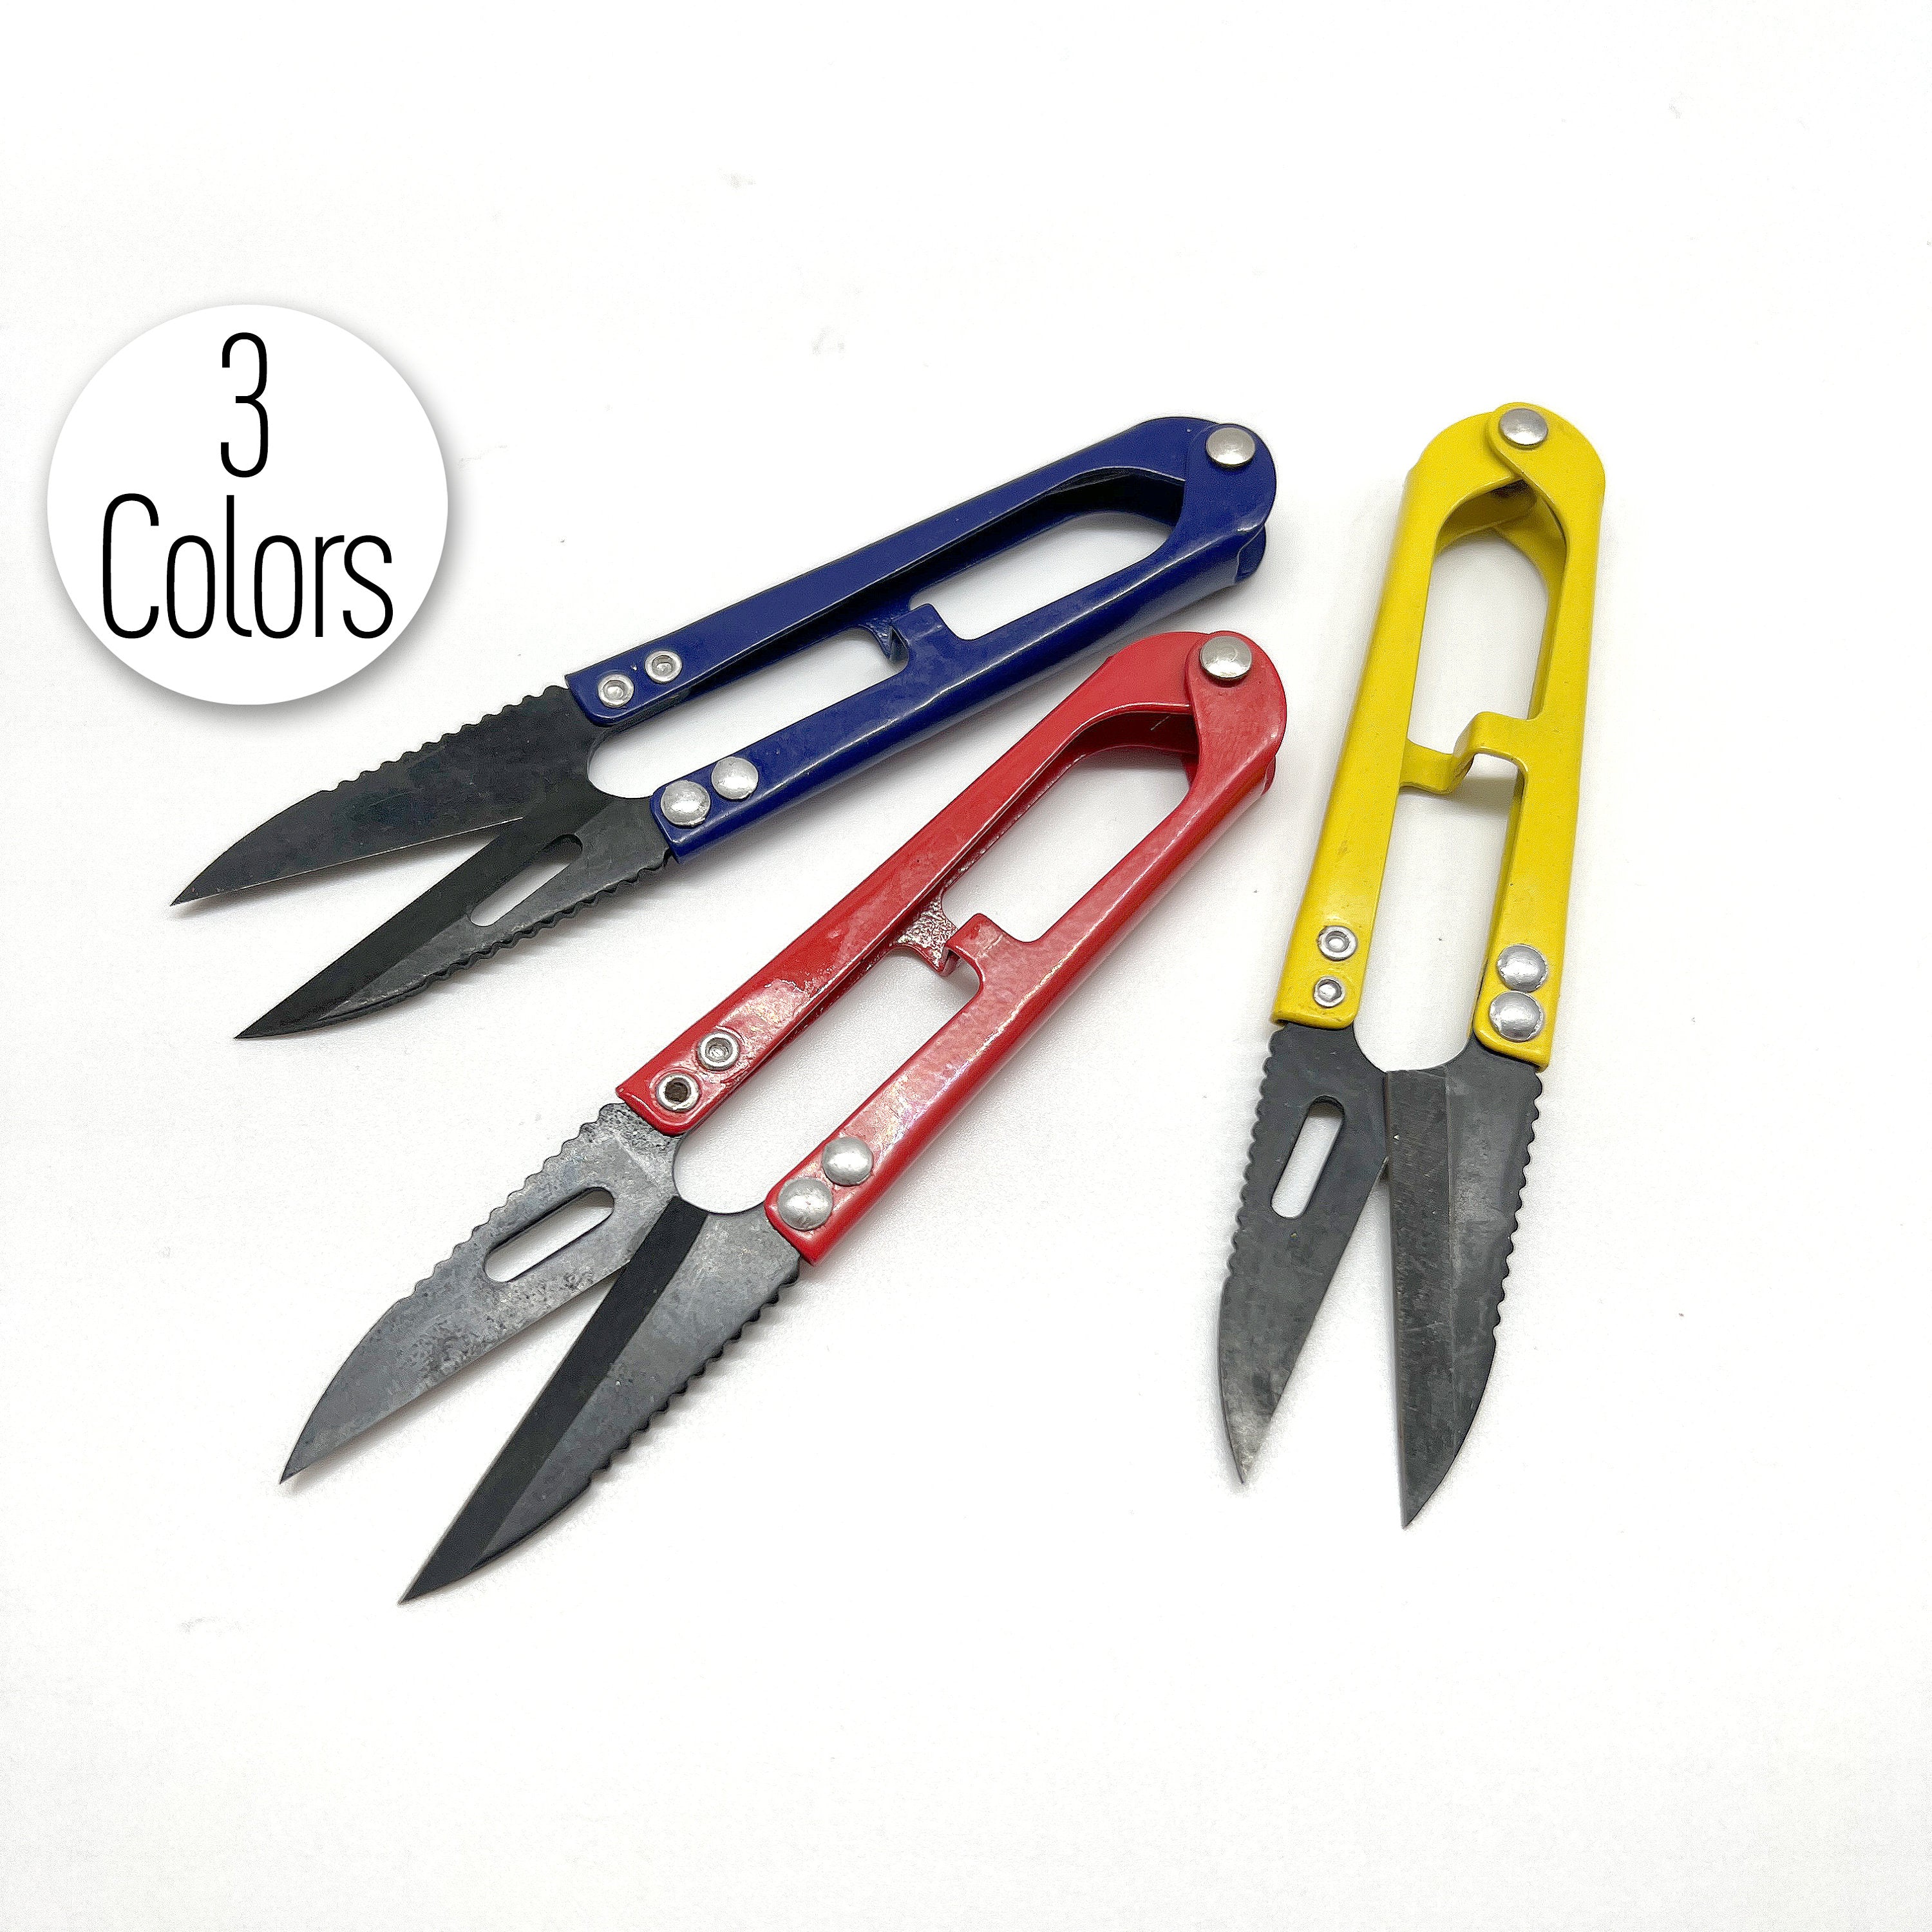 Handy Sewing and Quilting Thread Clipping Snippers in 3 colors